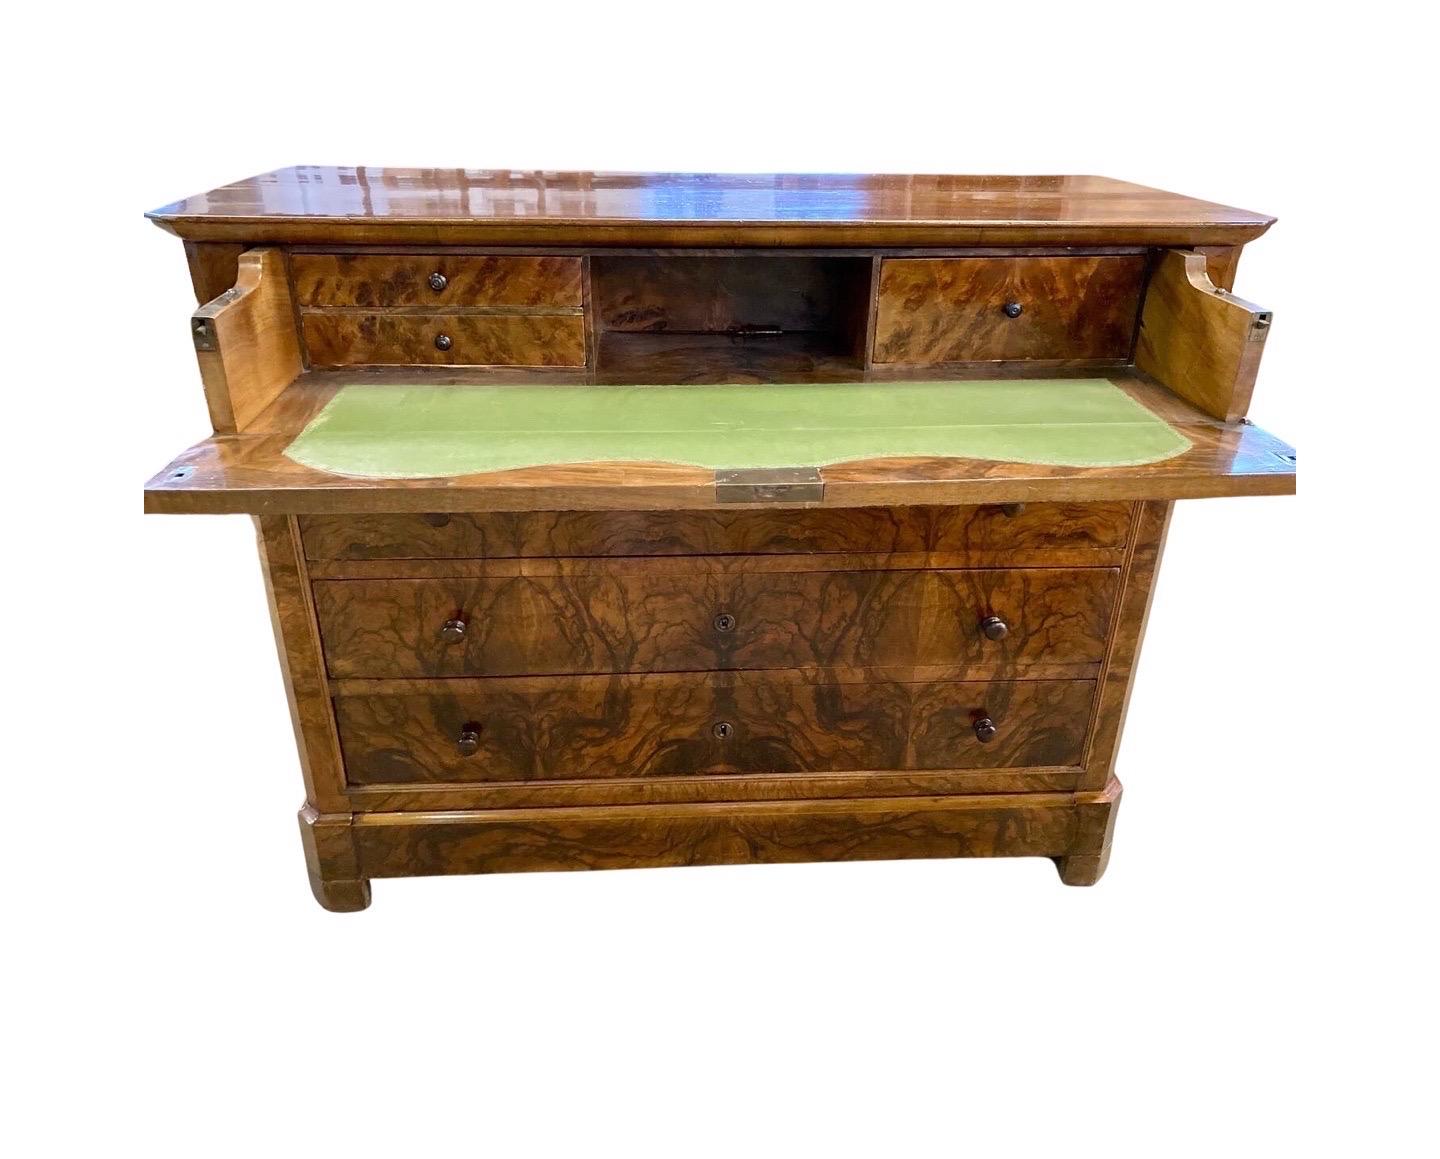 Louis Philippe butler's desk / chest of drawers made in Italy in the mid 1800s using walnut. The first thing that will catch your attention of this beautiful piece is the stunning burl walnut veneer; was just masterfully done: the symmetry, the